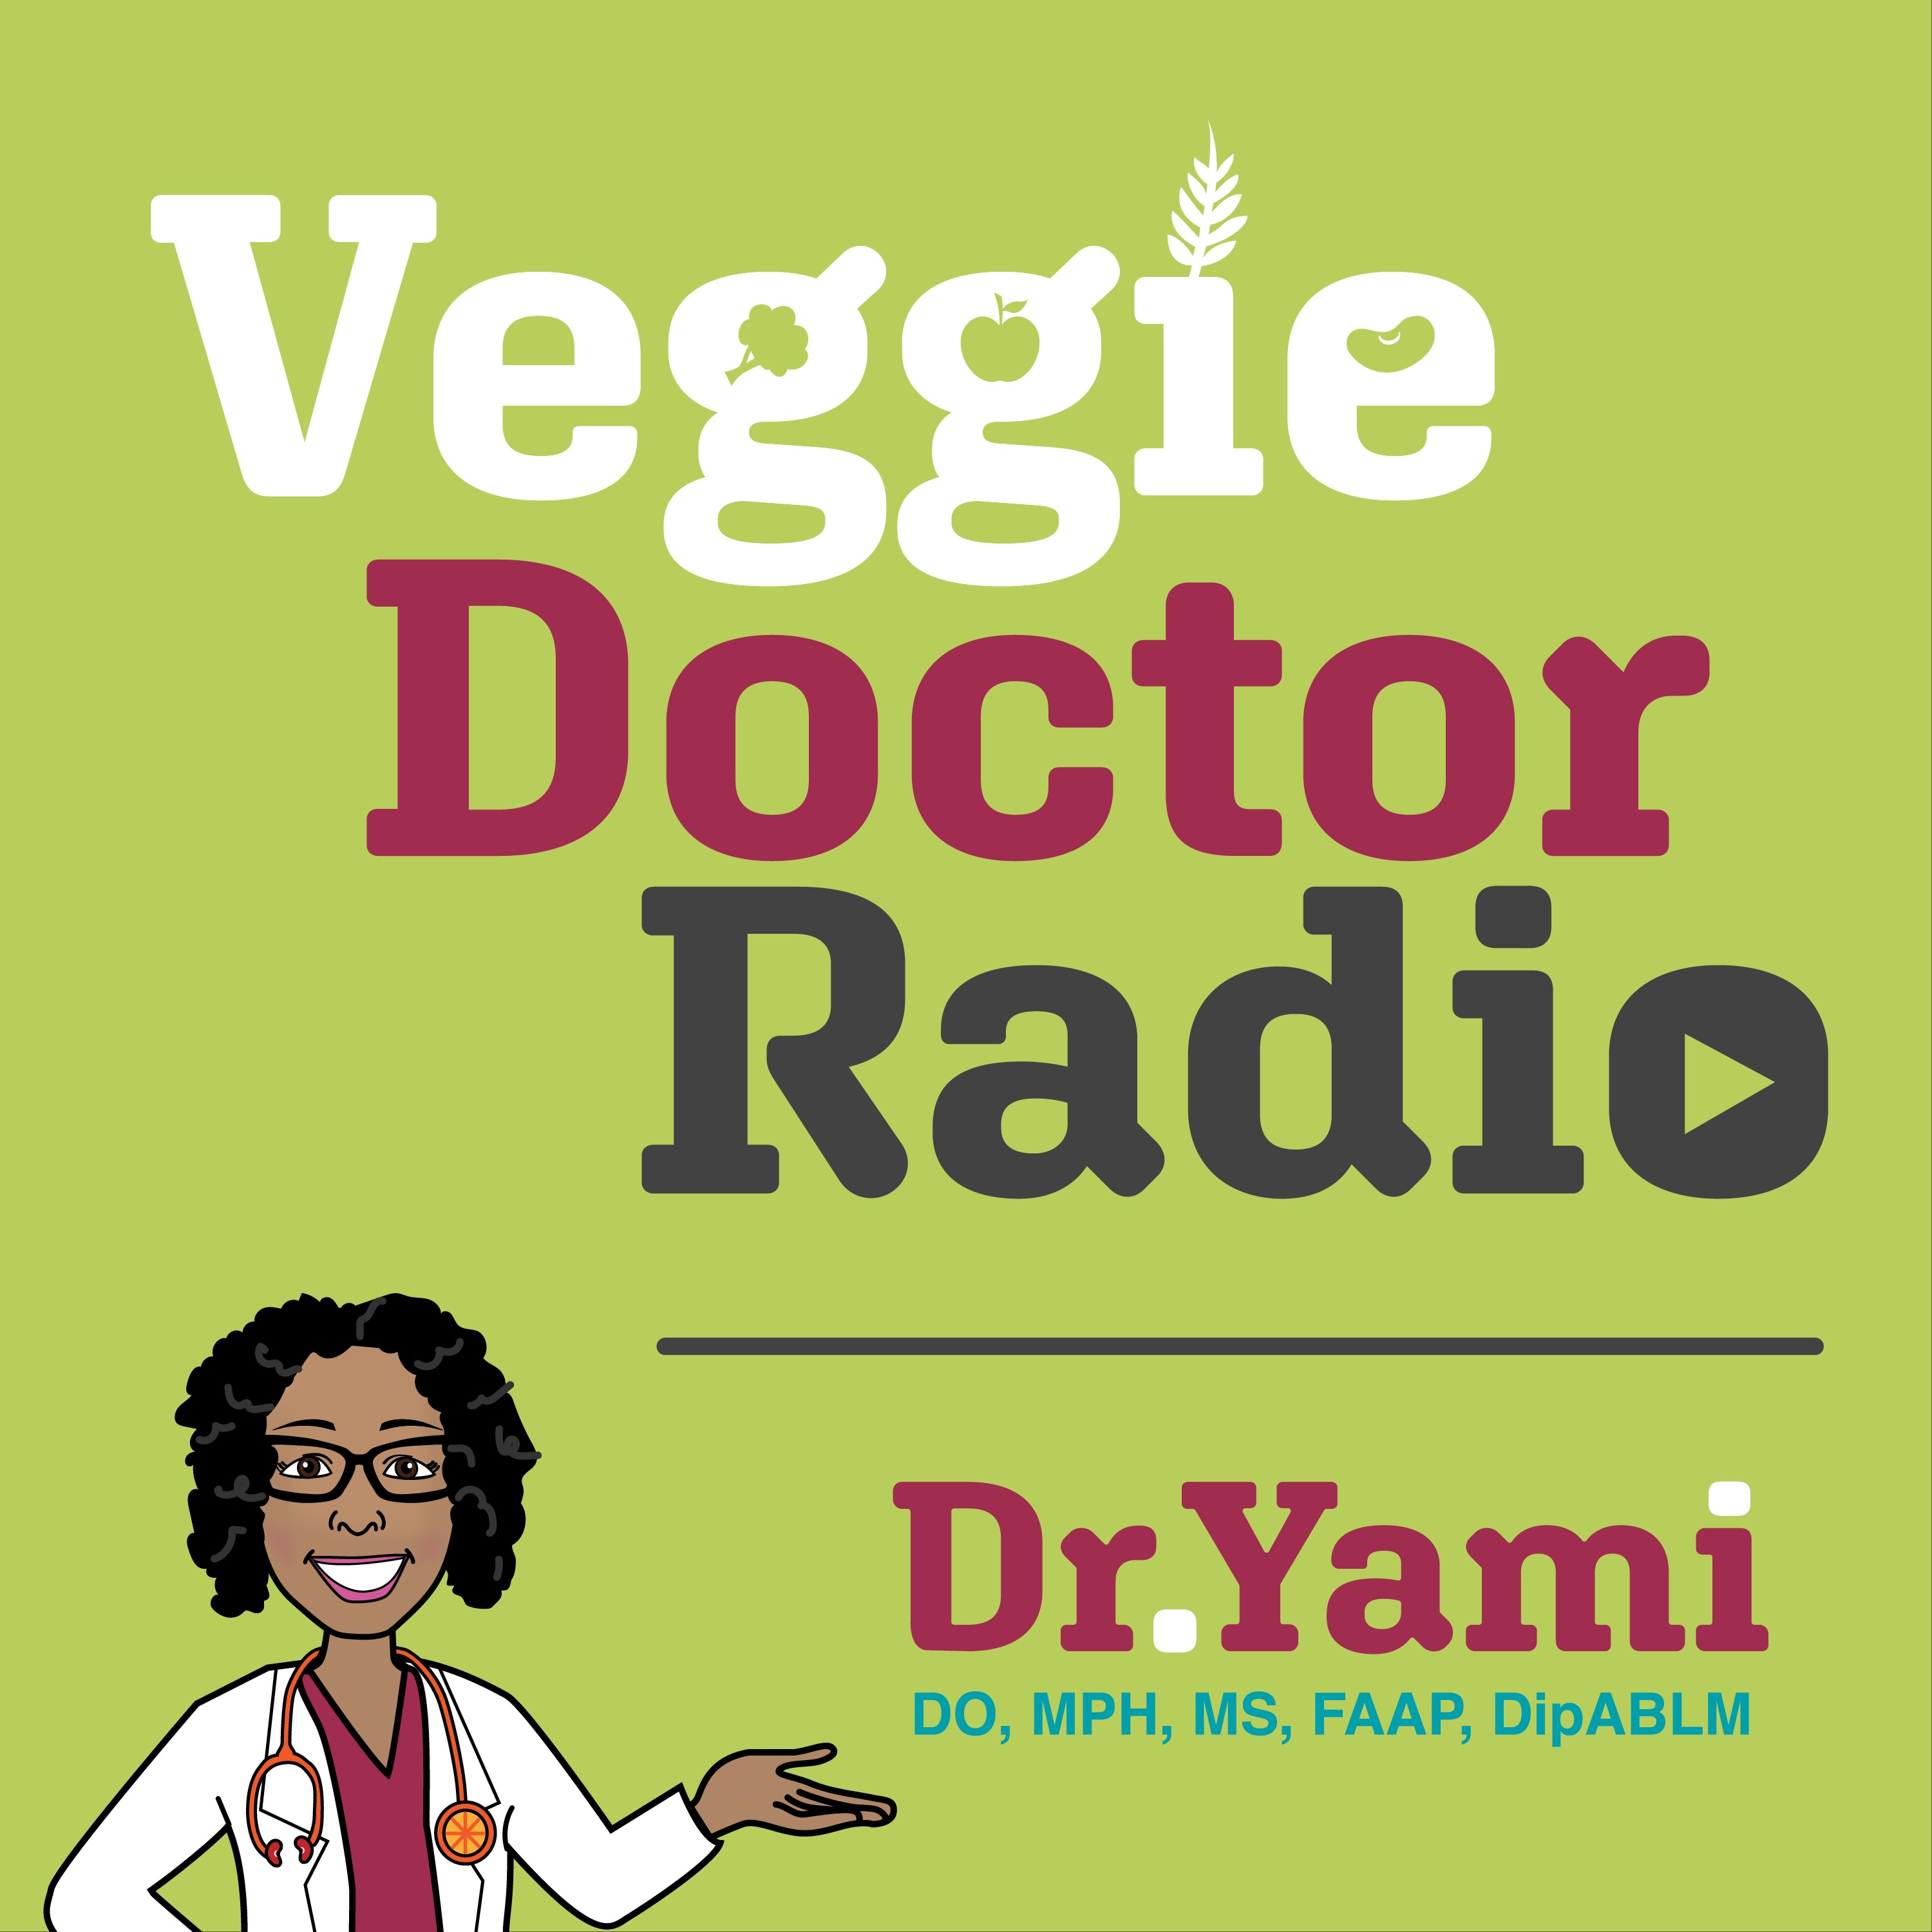 164: From Impossible to Possible with Dr. Leila Dehghan (Veggie Doctor Radio)